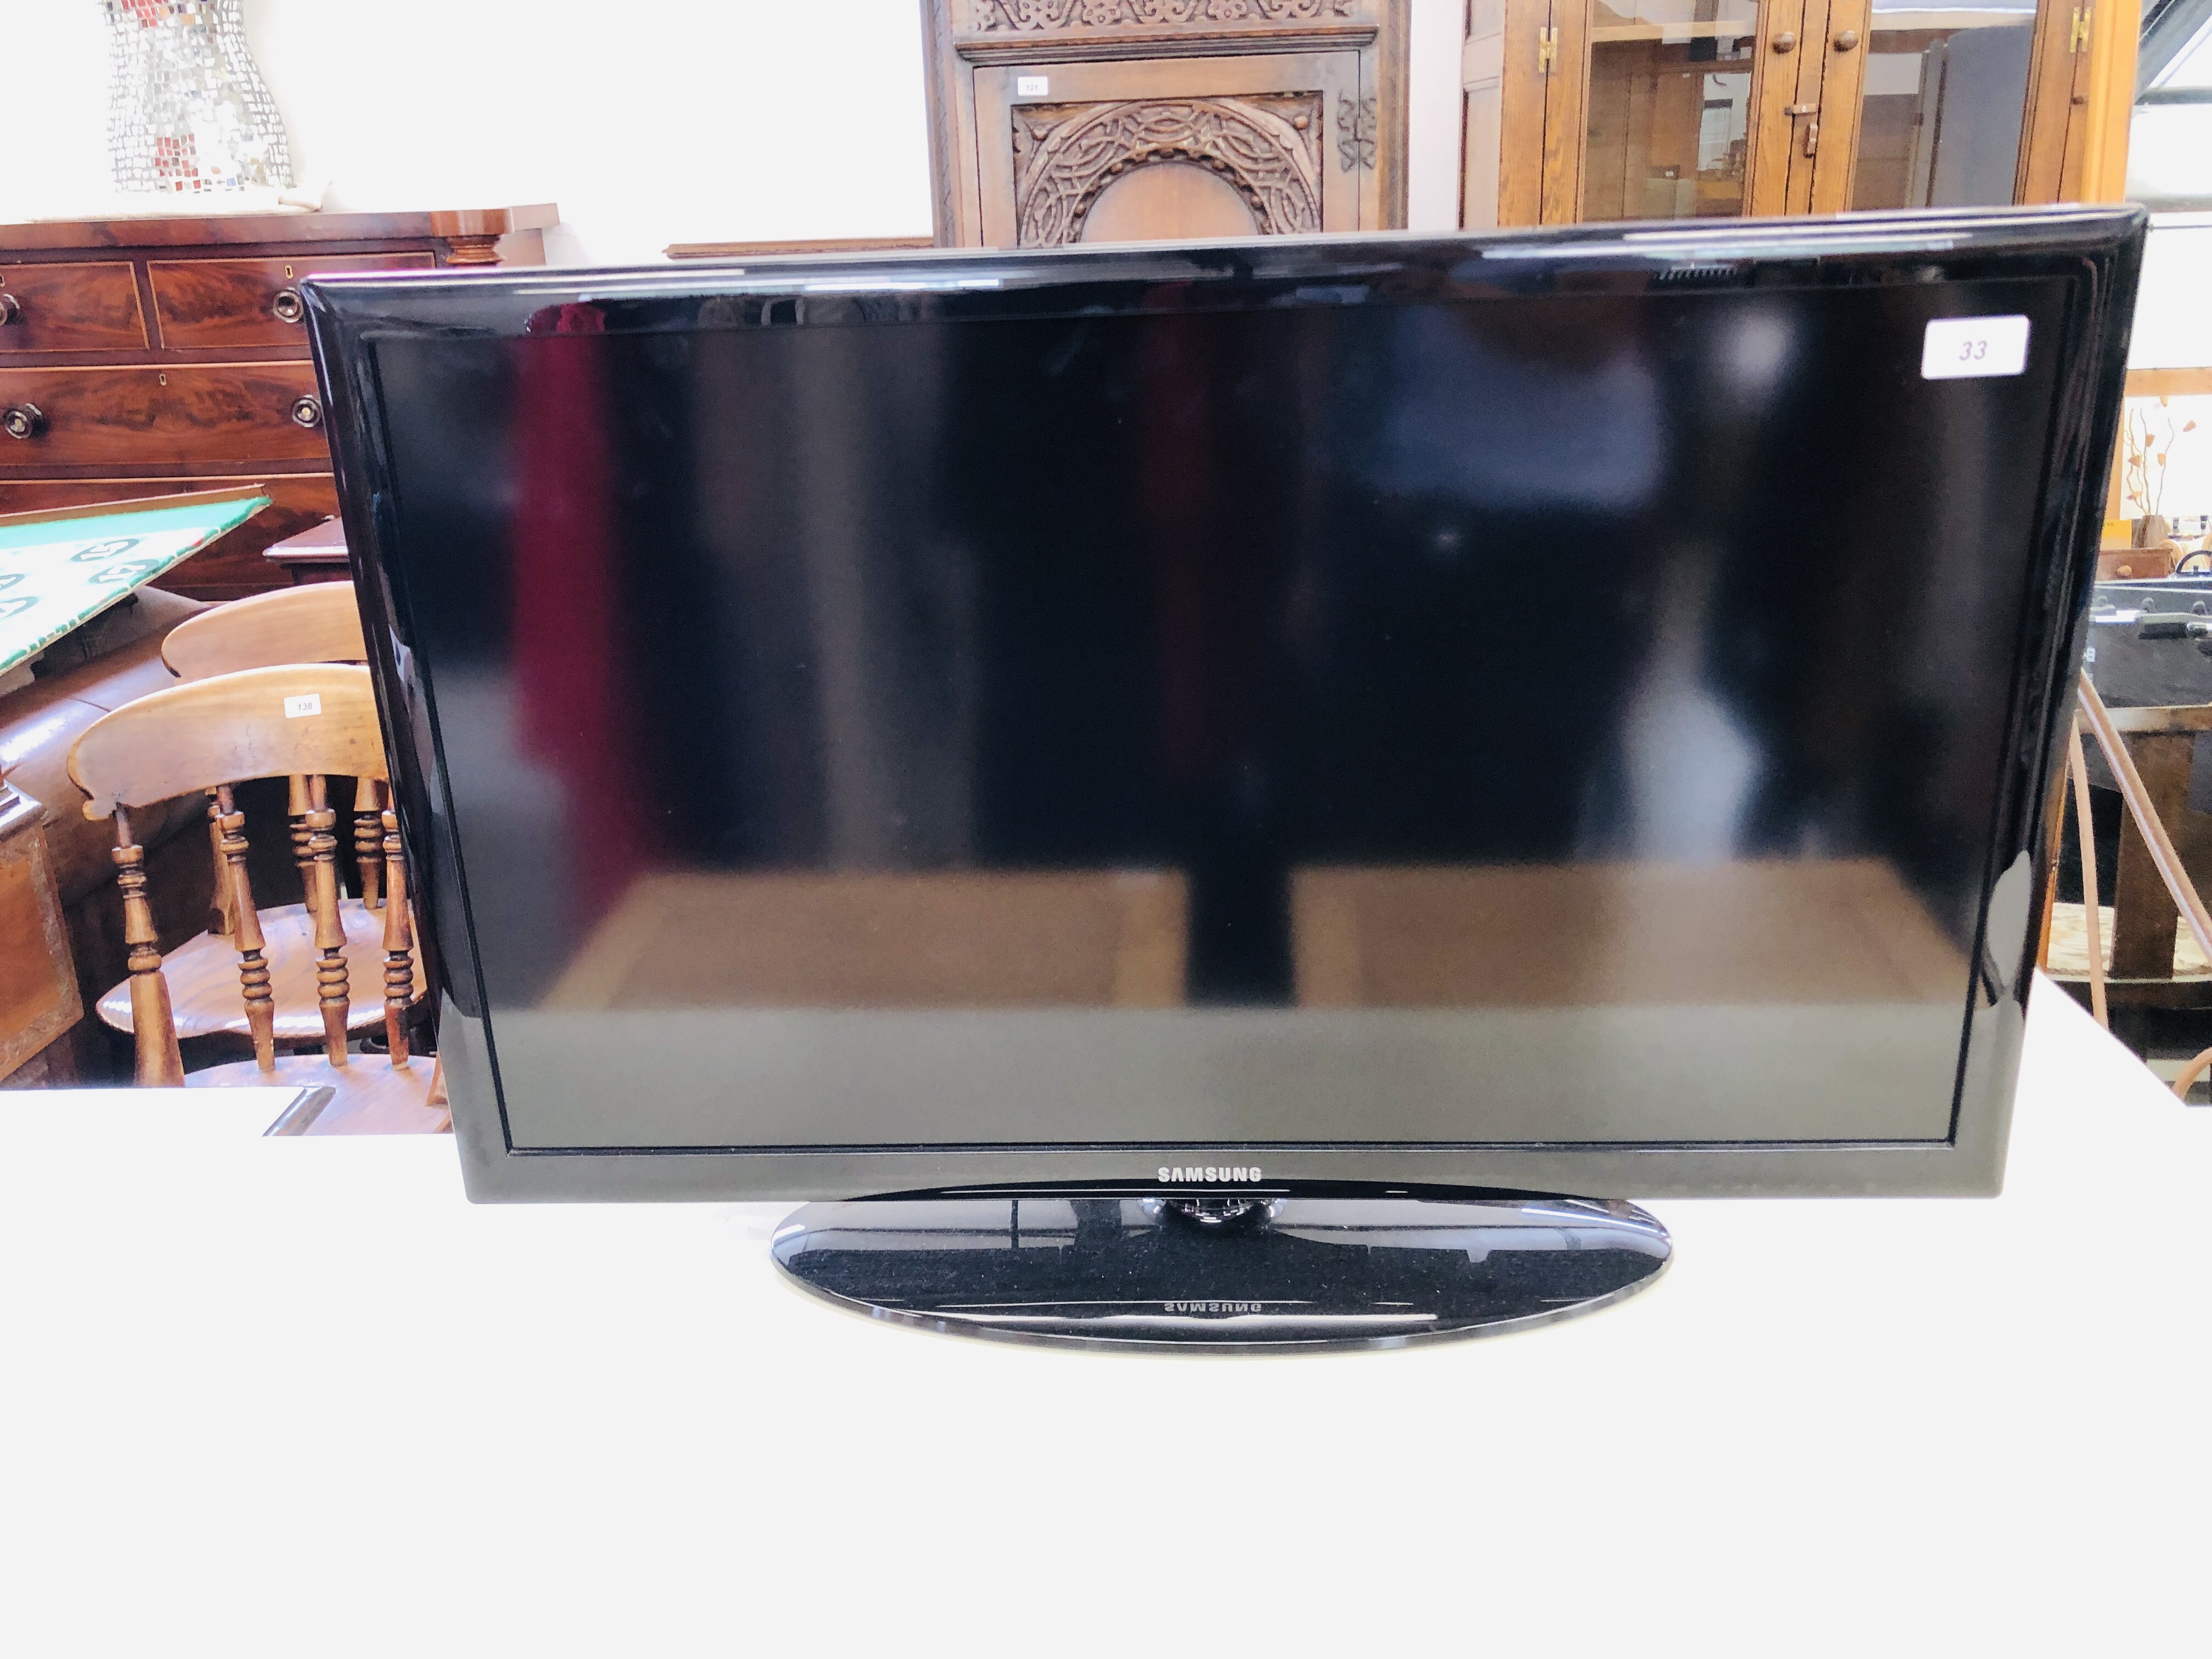 A SAMSUNG 32 INCH TELEVISION - SOLD AS SEEN.